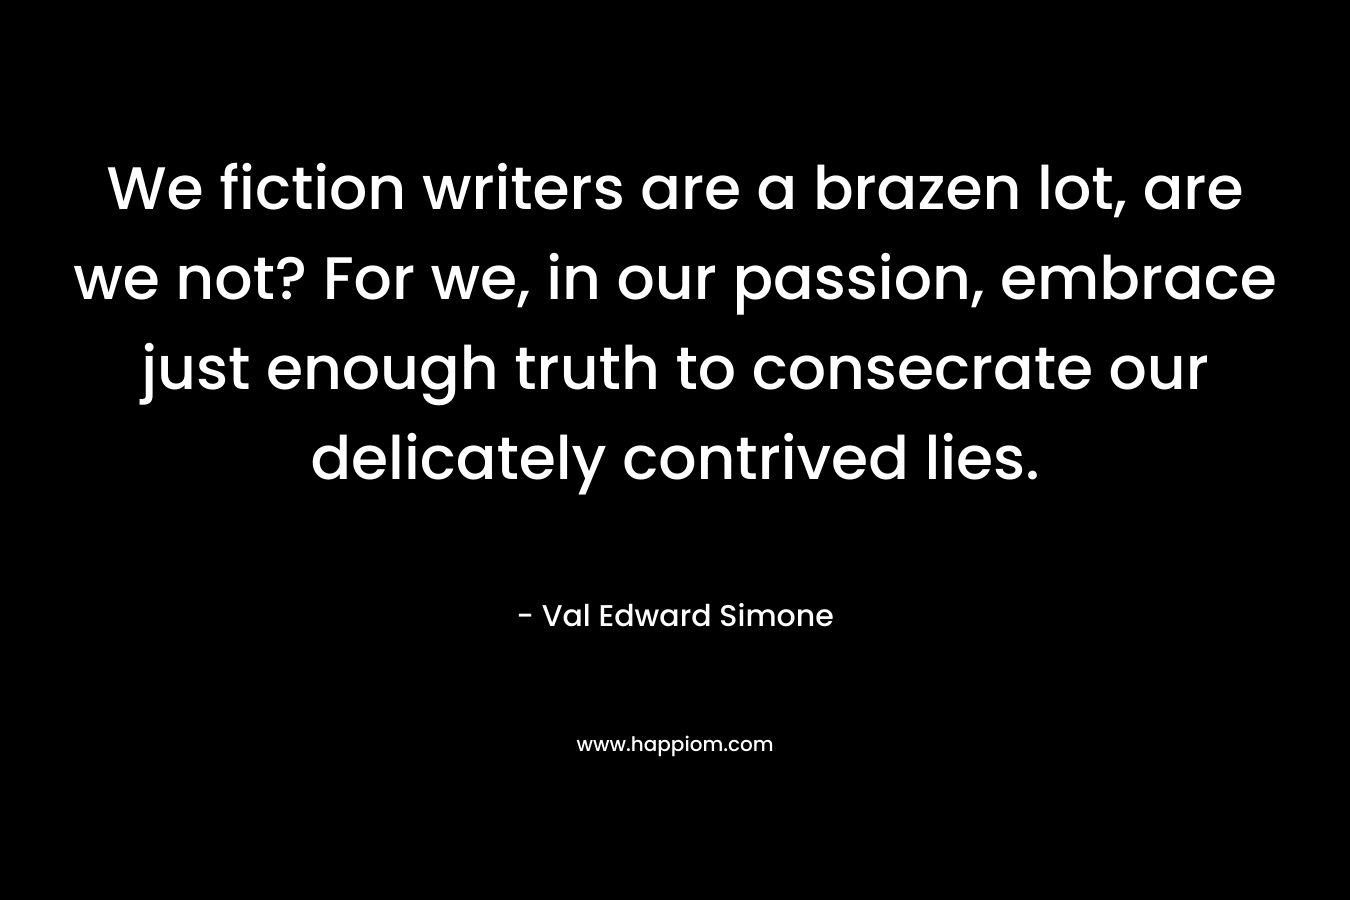 We fiction writers are a brazen lot, are we not? For we, in our passion, embrace just enough truth to consecrate our delicately contrived lies. – Val Edward Simone